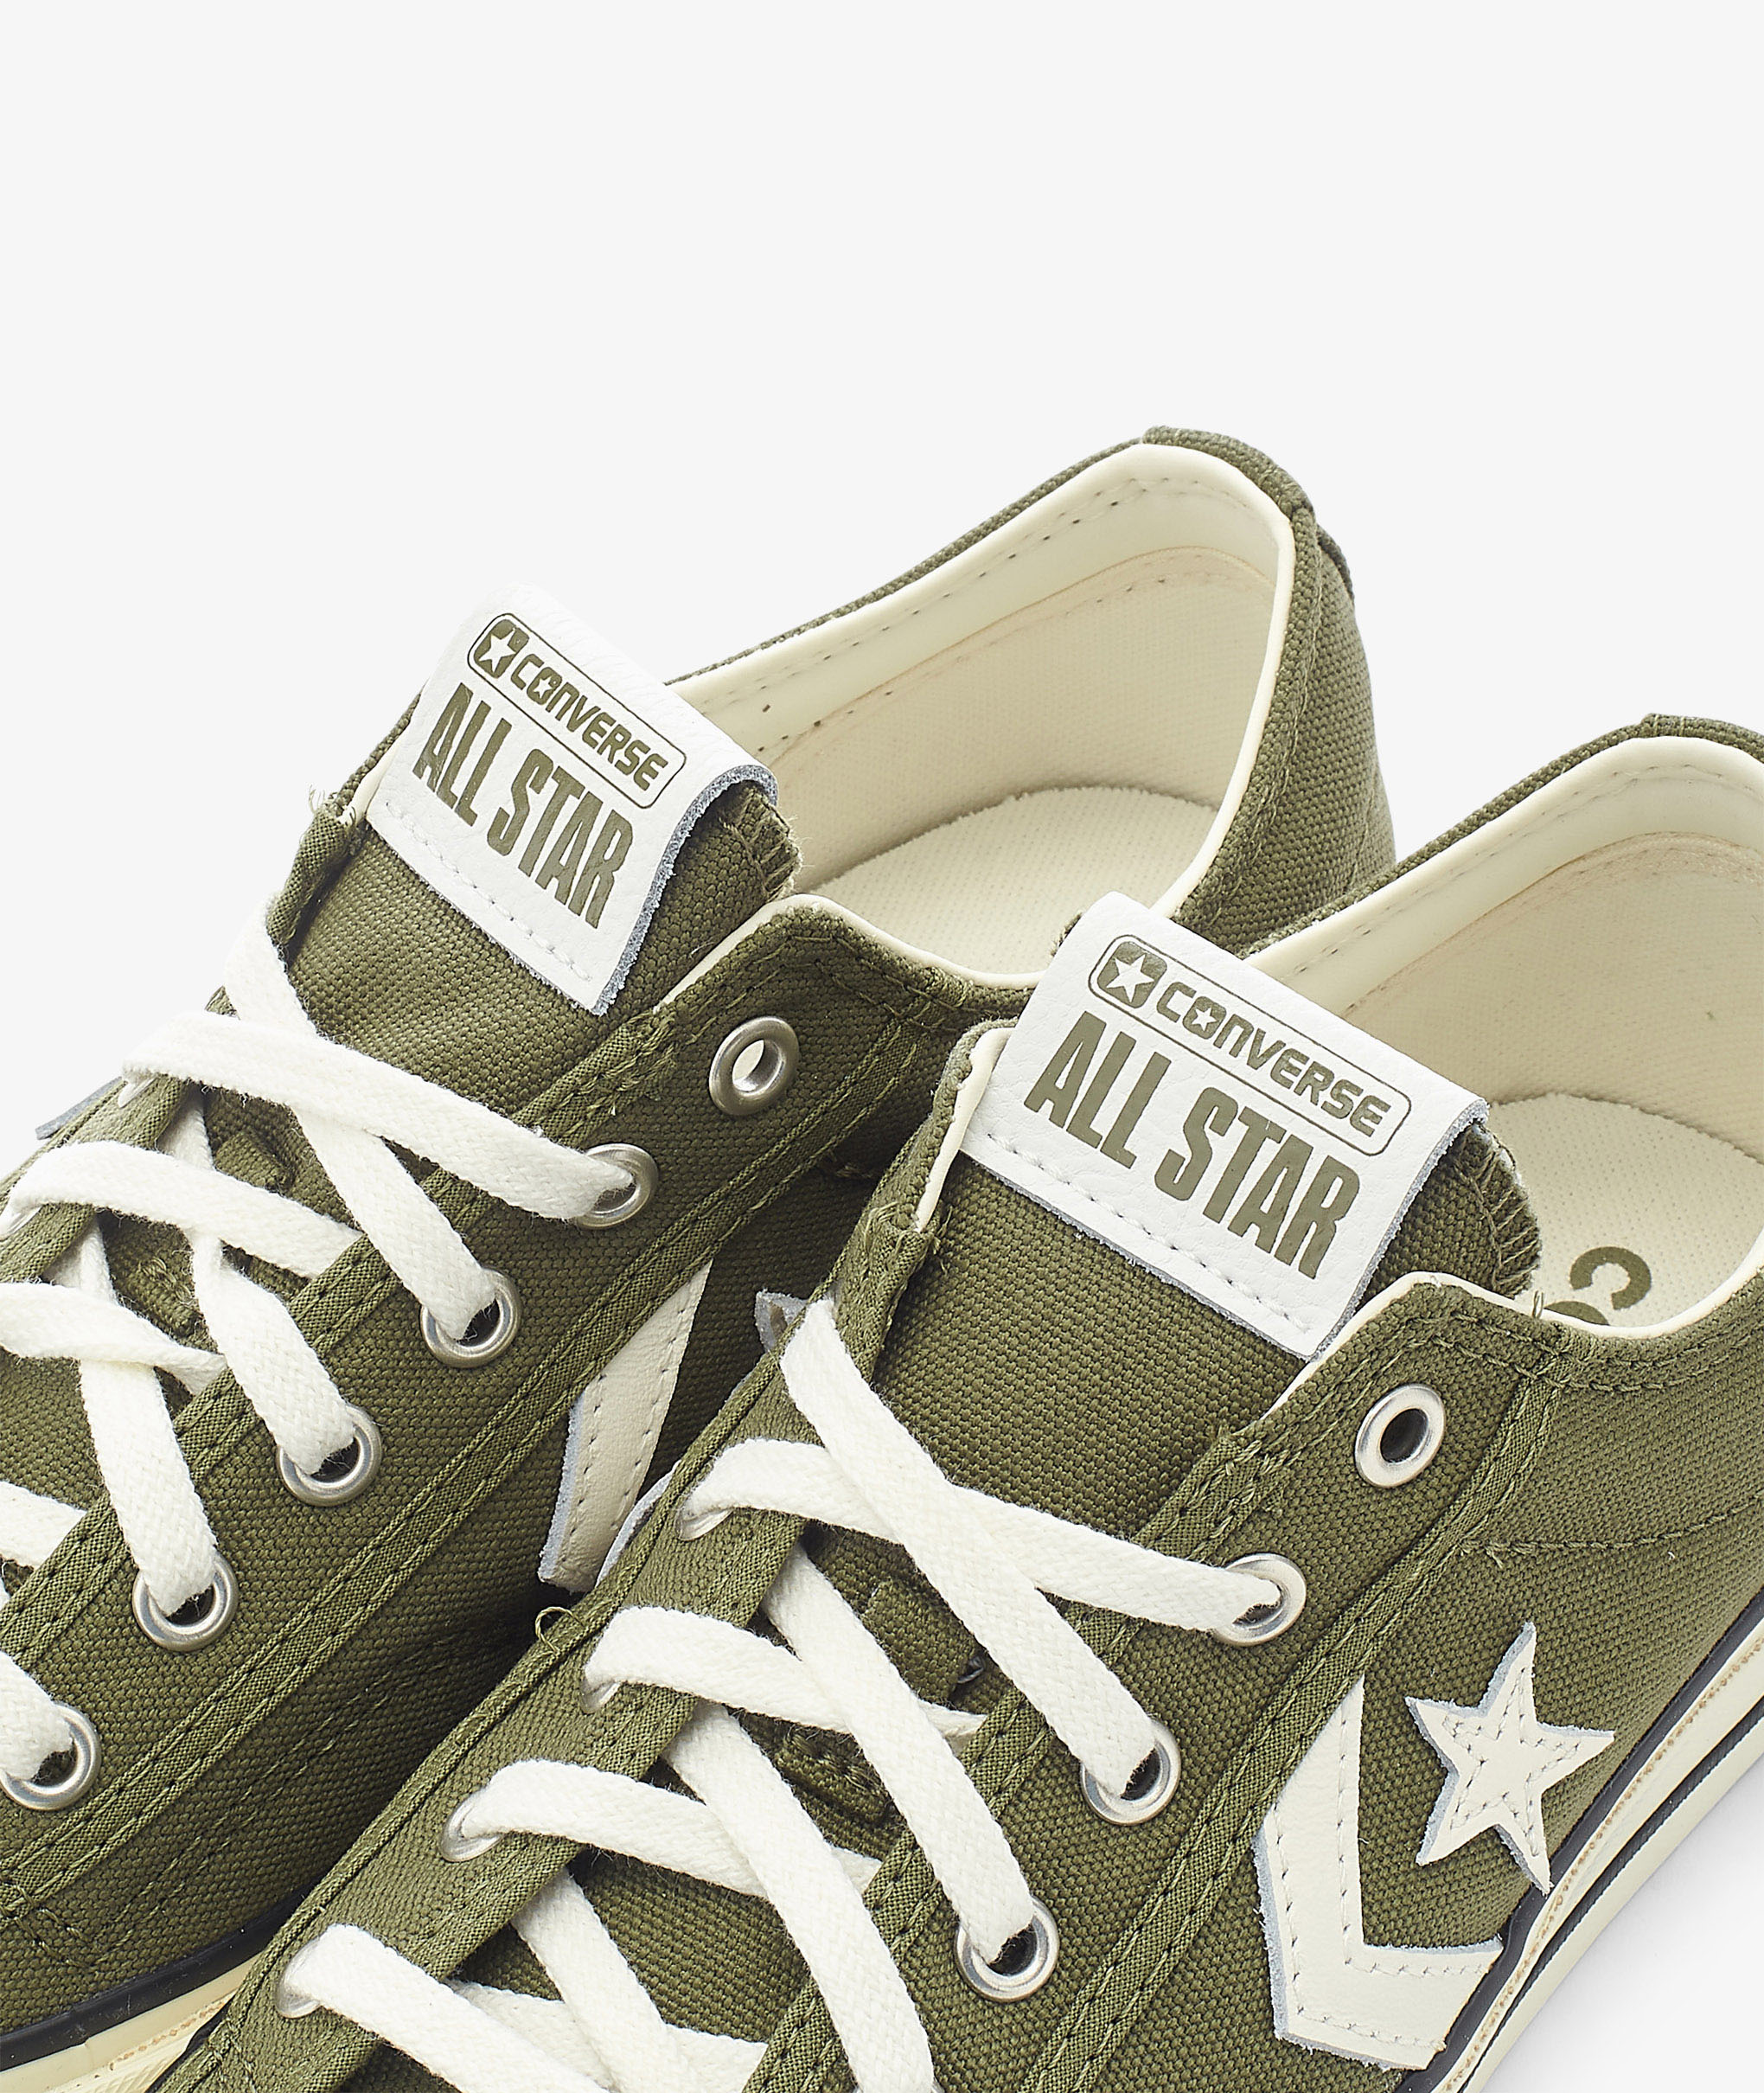 Norse Store Shipping Worldwide - Converse 76 OX - Forest Grey